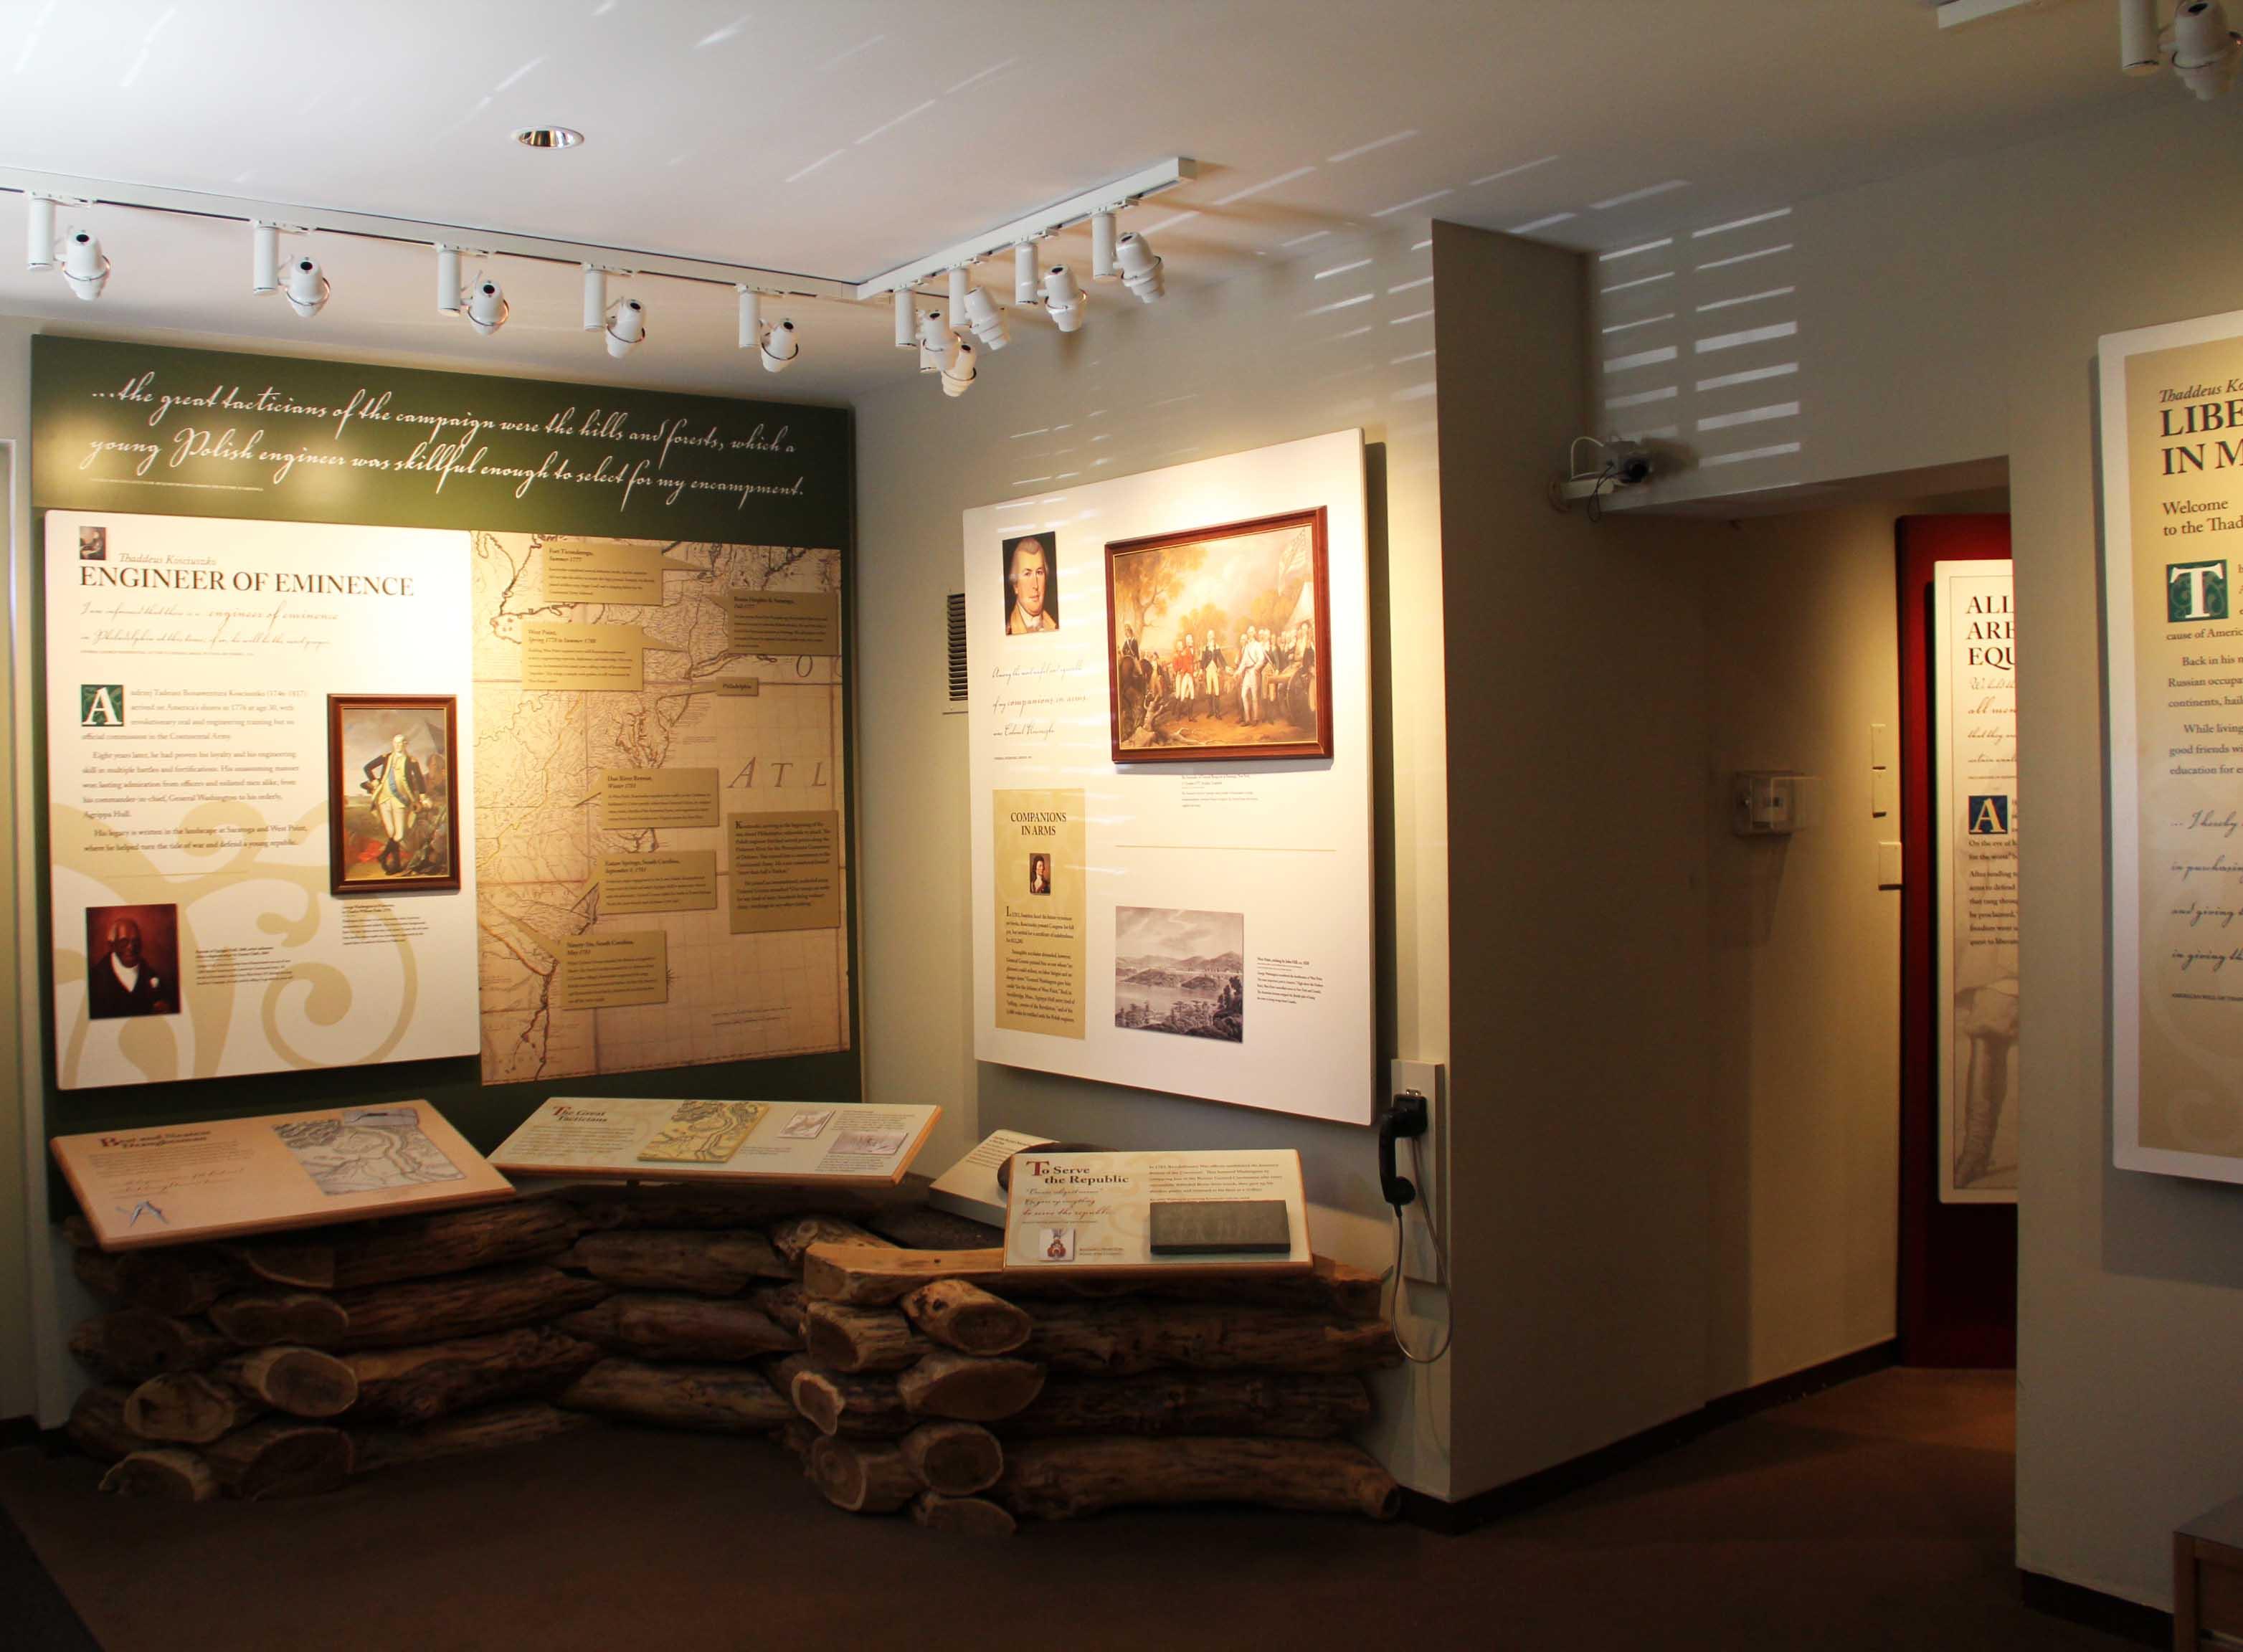 Photo of exhibit area with exhibit panels showing images, text, and a map of the eastern U.S.